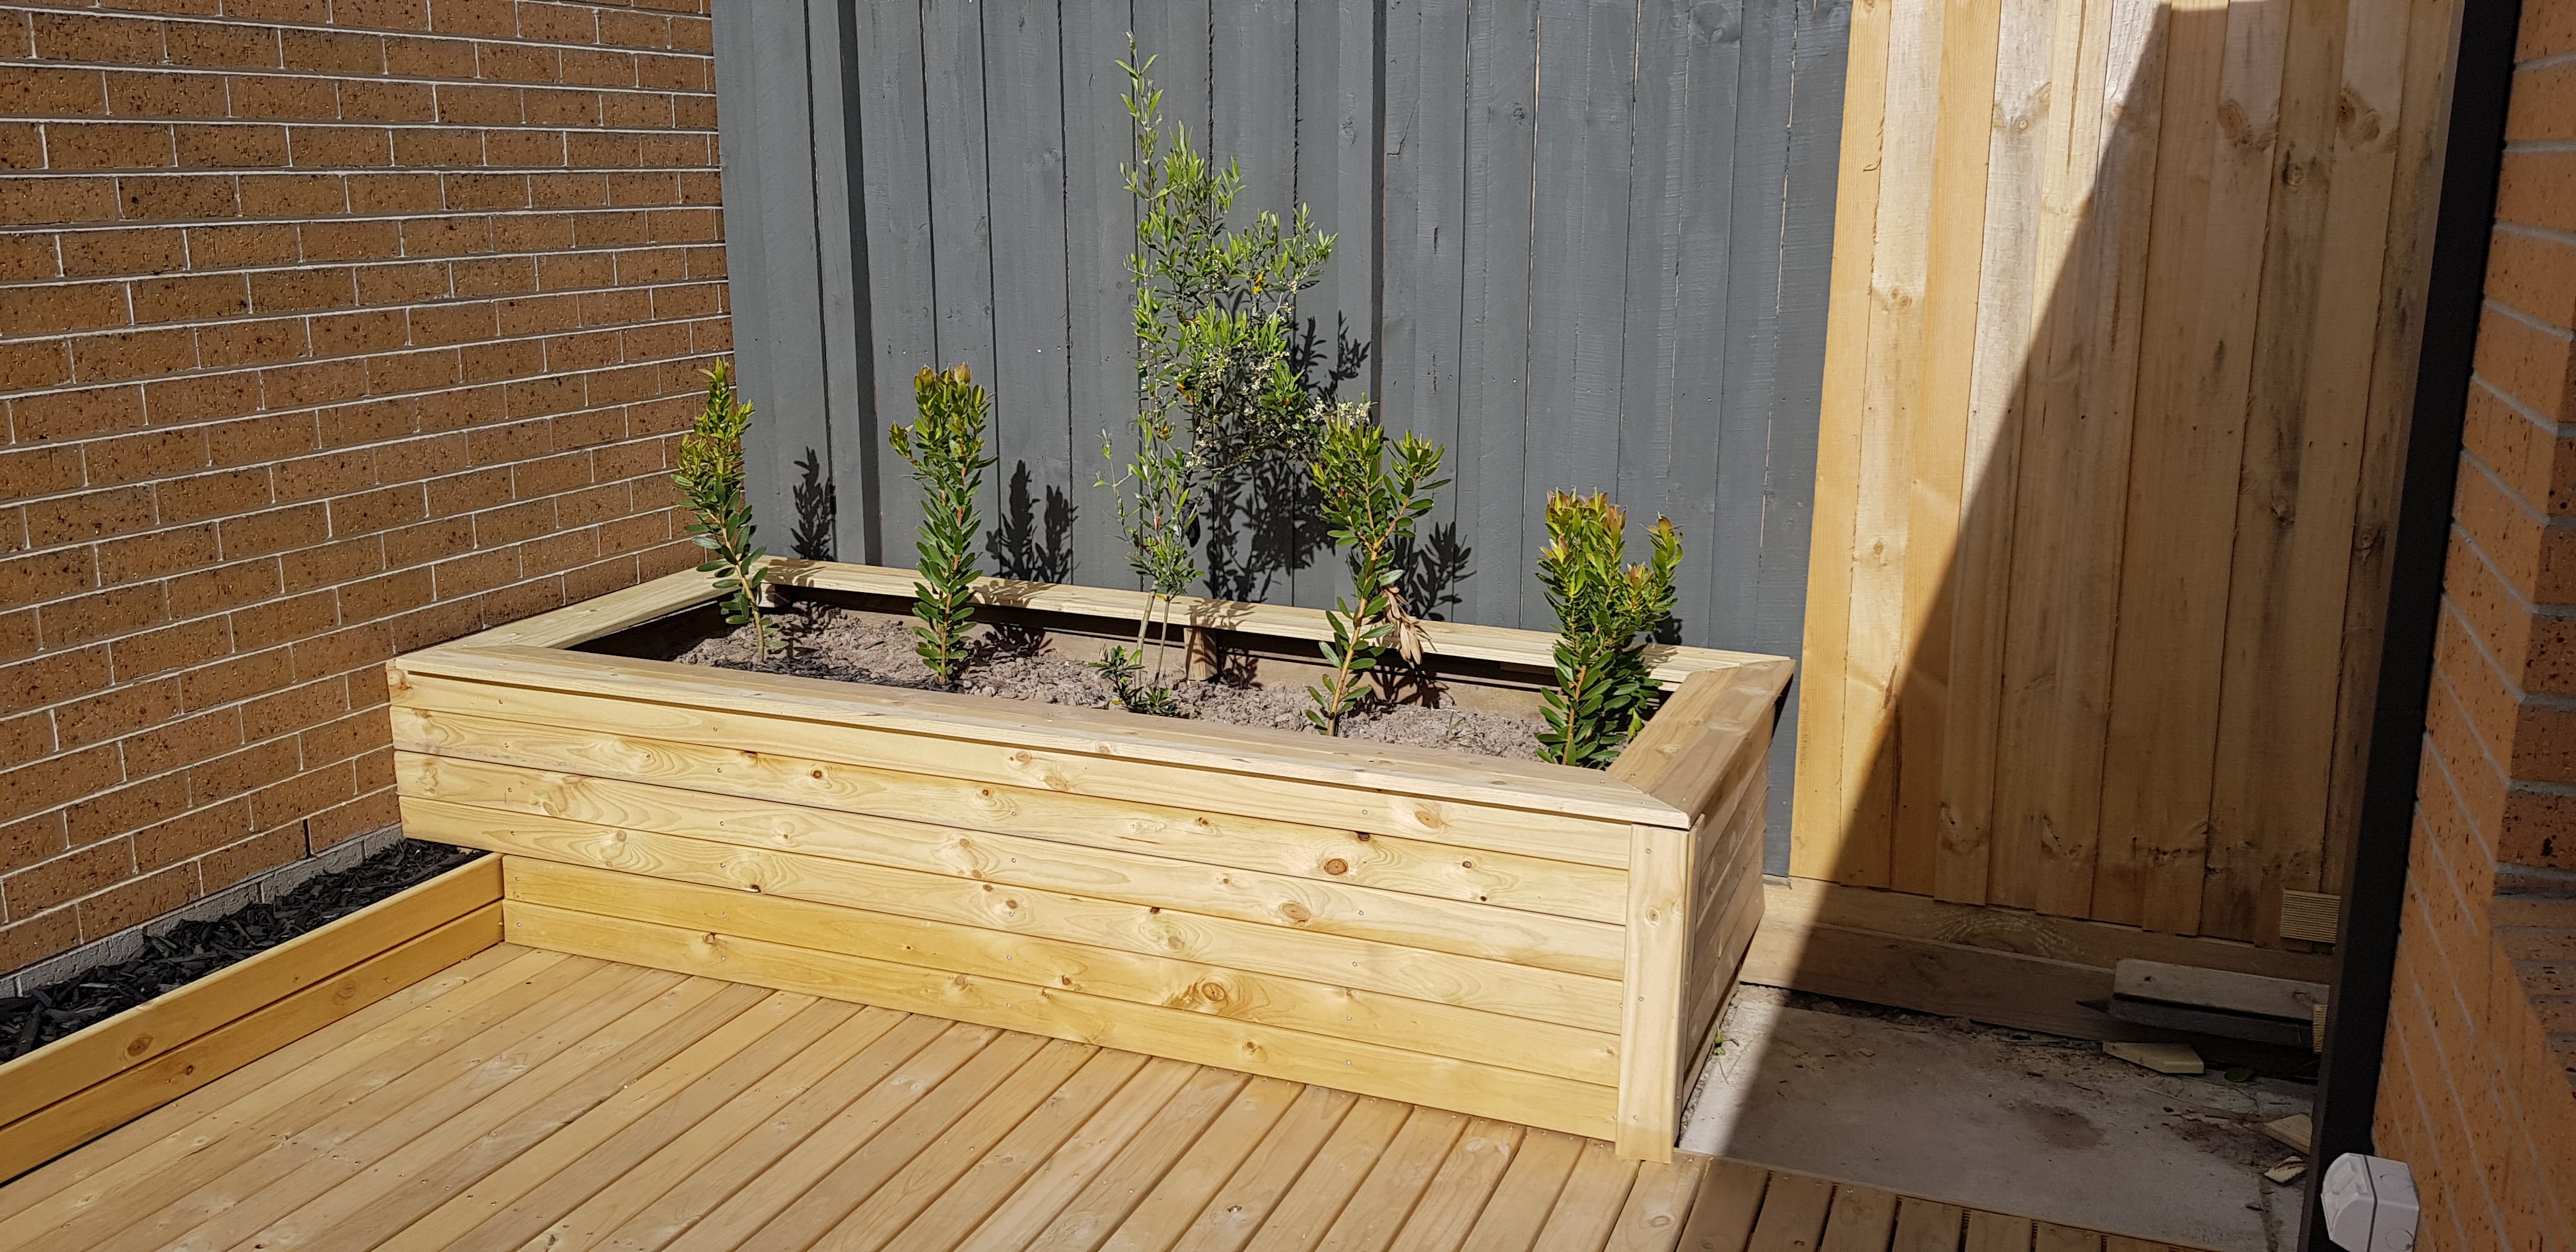 Planter box with timber deck cladding Bunnings Workshop community